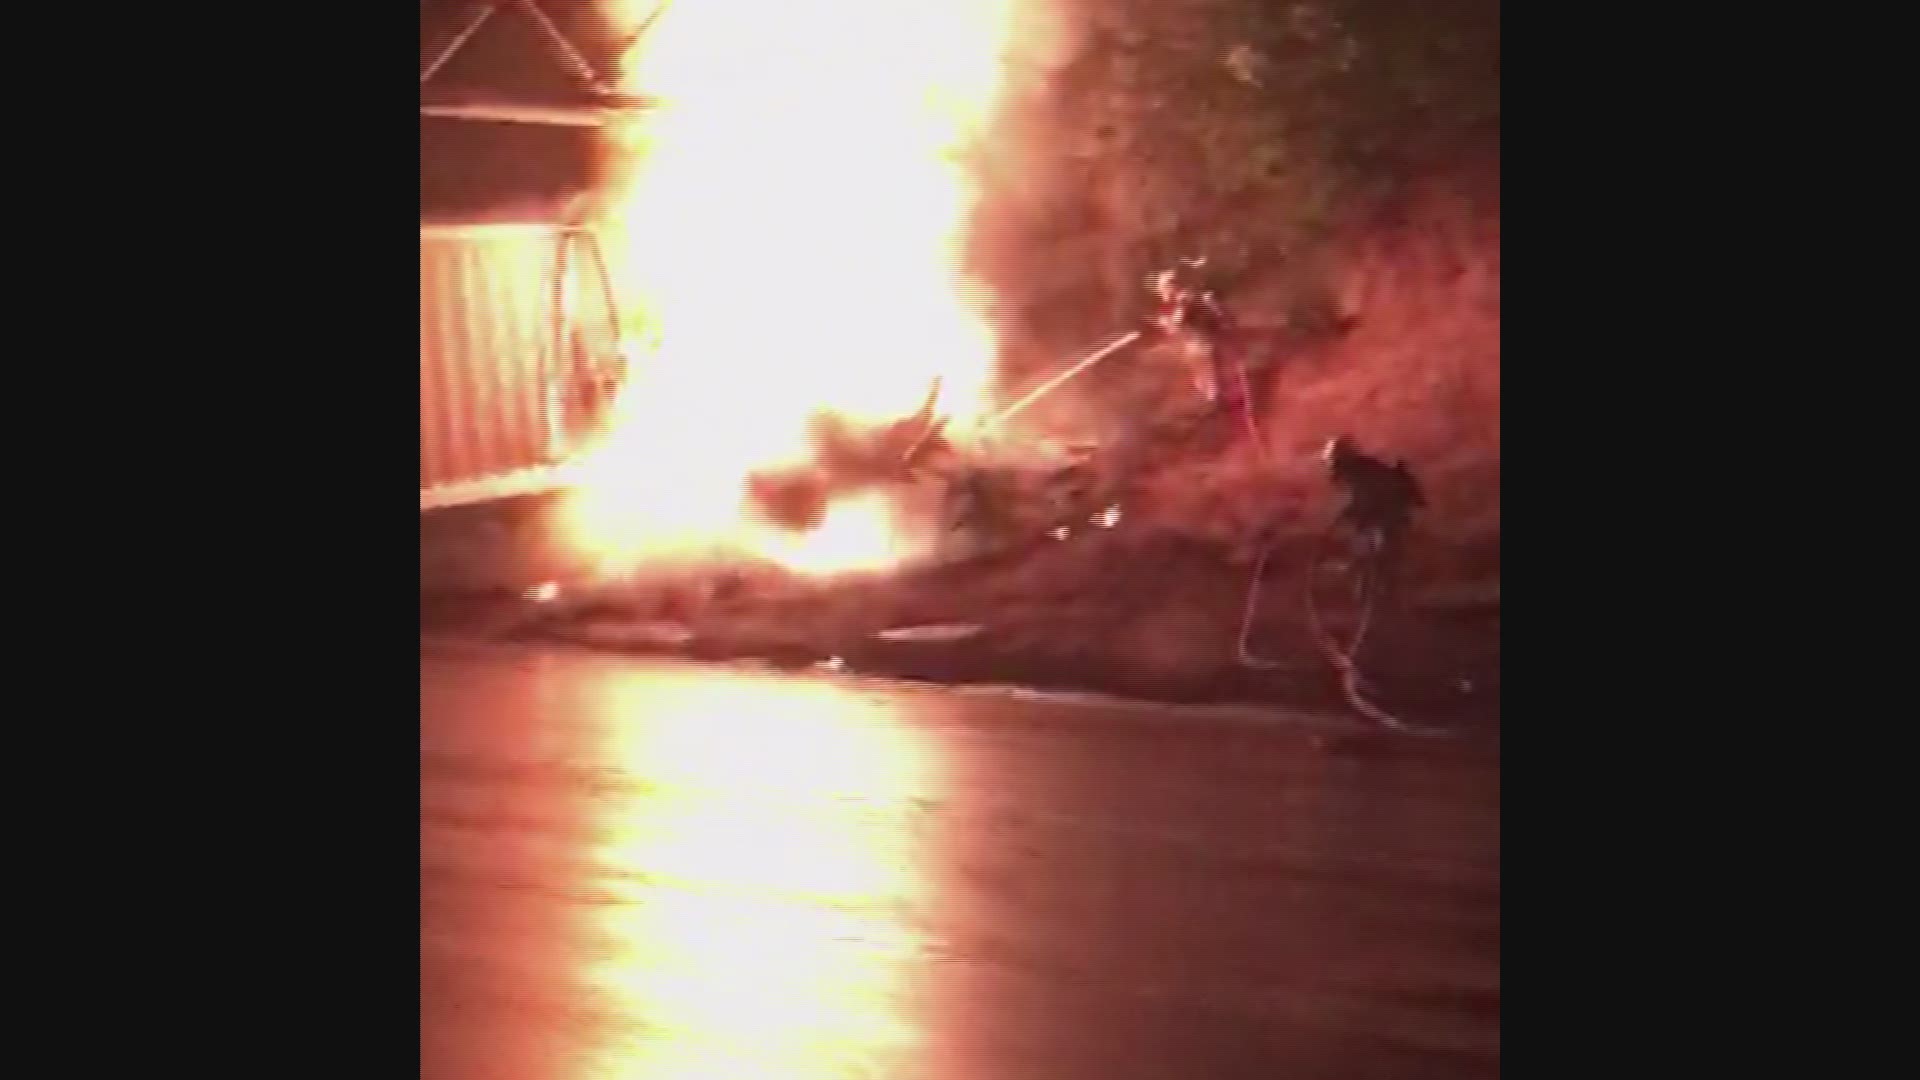 A semi-truck driver was killed in a fiery crash on Interstate 5 in Portland on Aug. 21. (Video courtesy of Hannah Lindner)